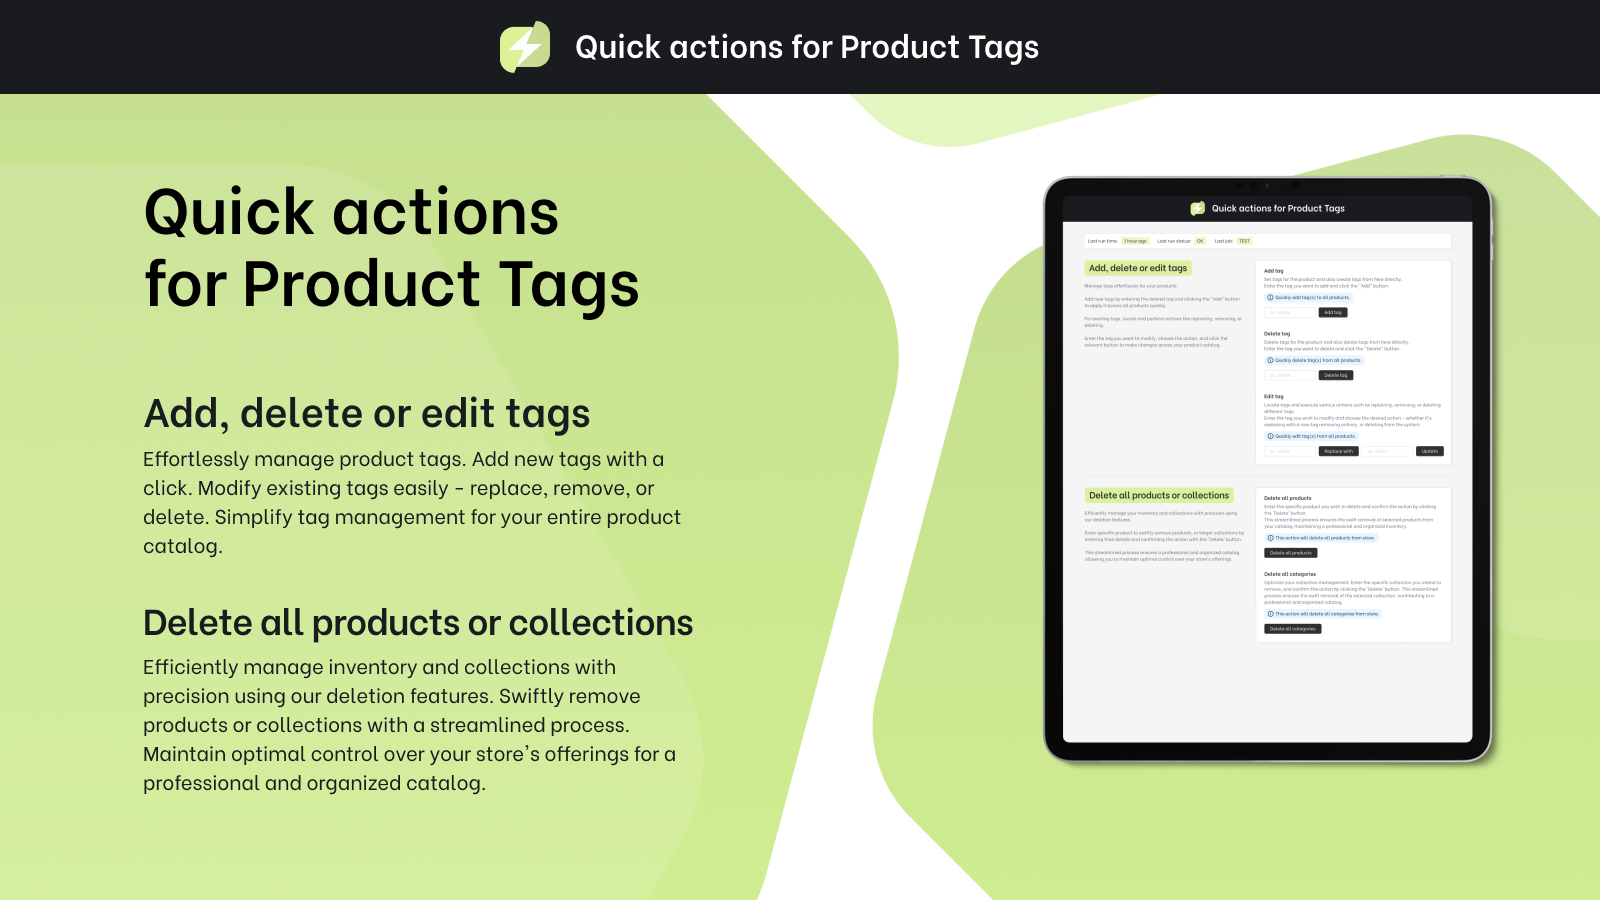 Add, remove, edit, and modify tags across all products.